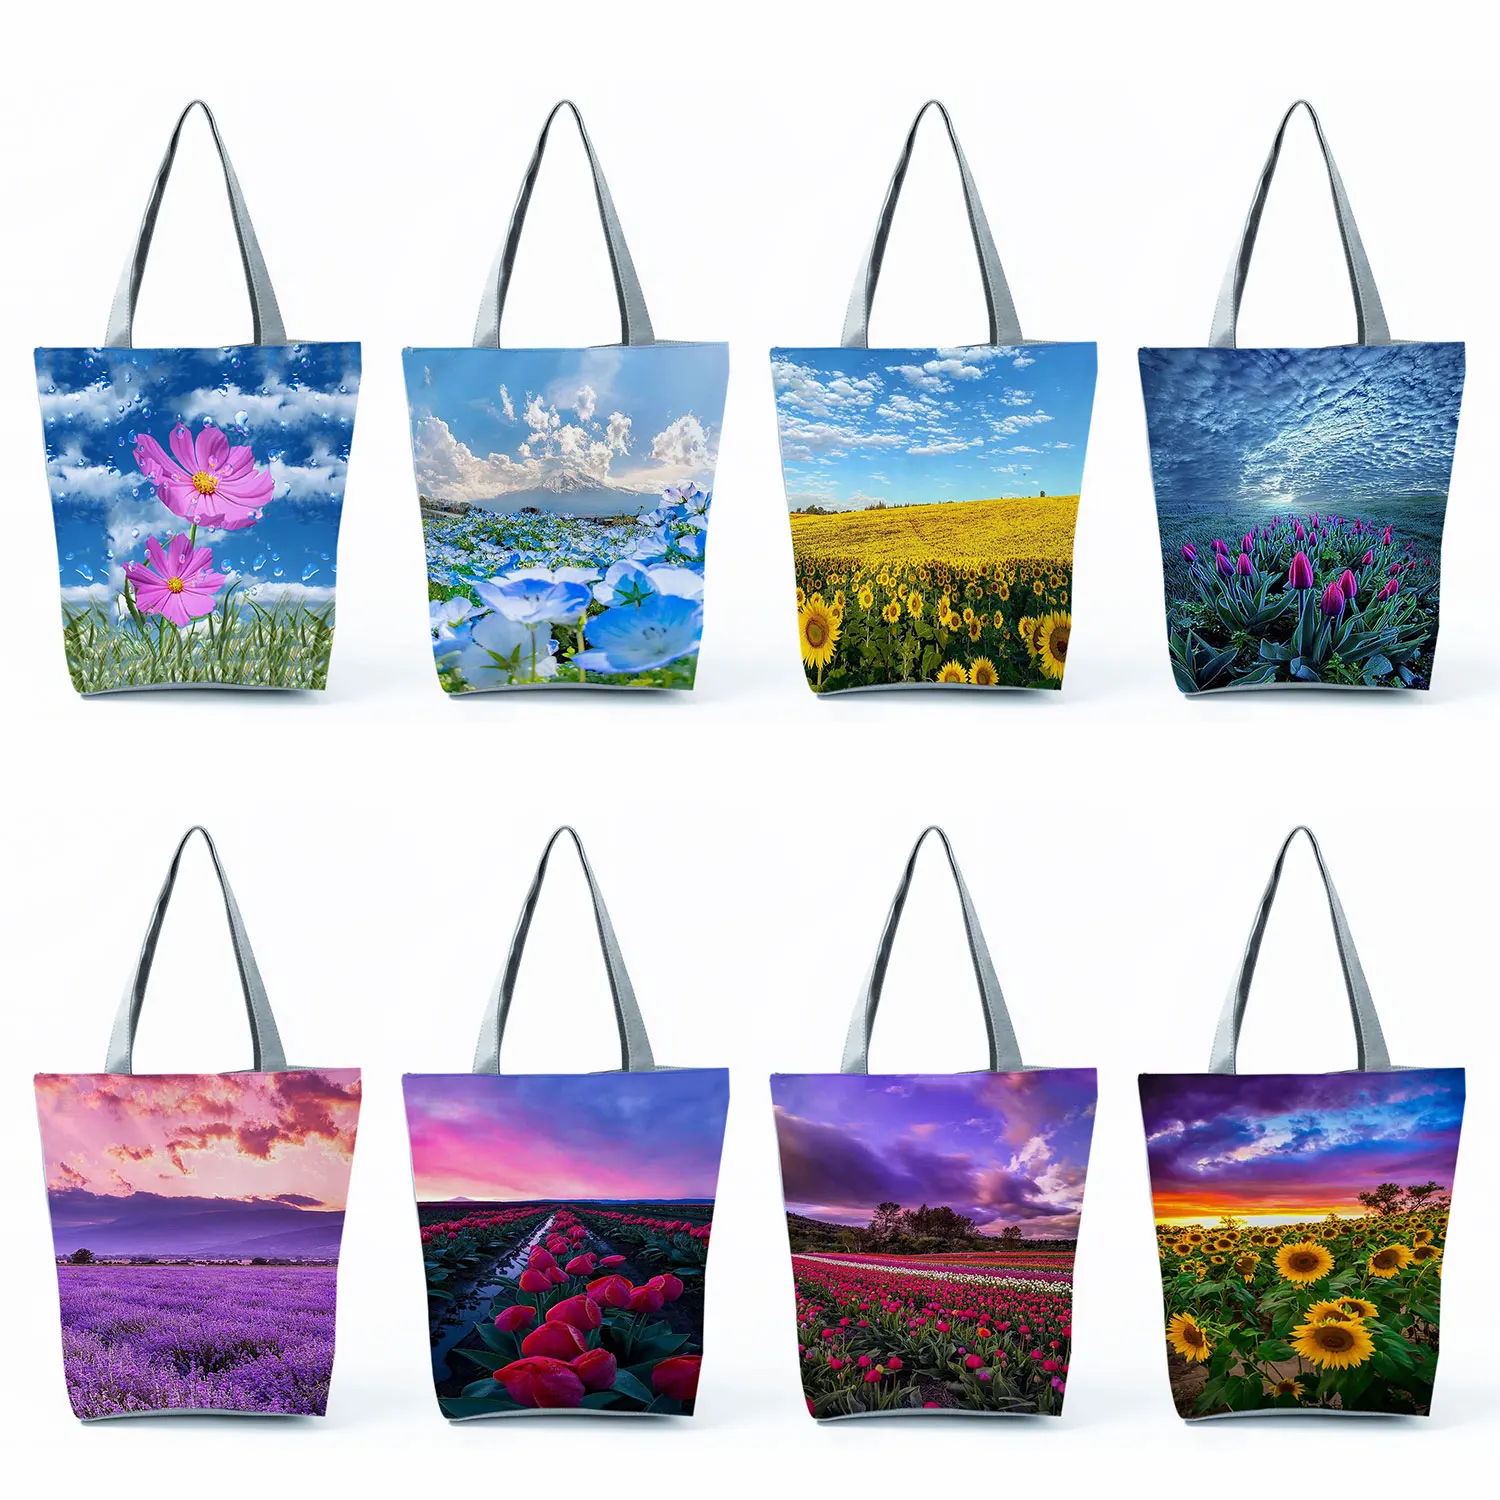 

Tote Handbags Beautiful Landscape Pattern Casual Travel High Capacity Bright Colors Floral Print Portable Reusable Shopping Bags